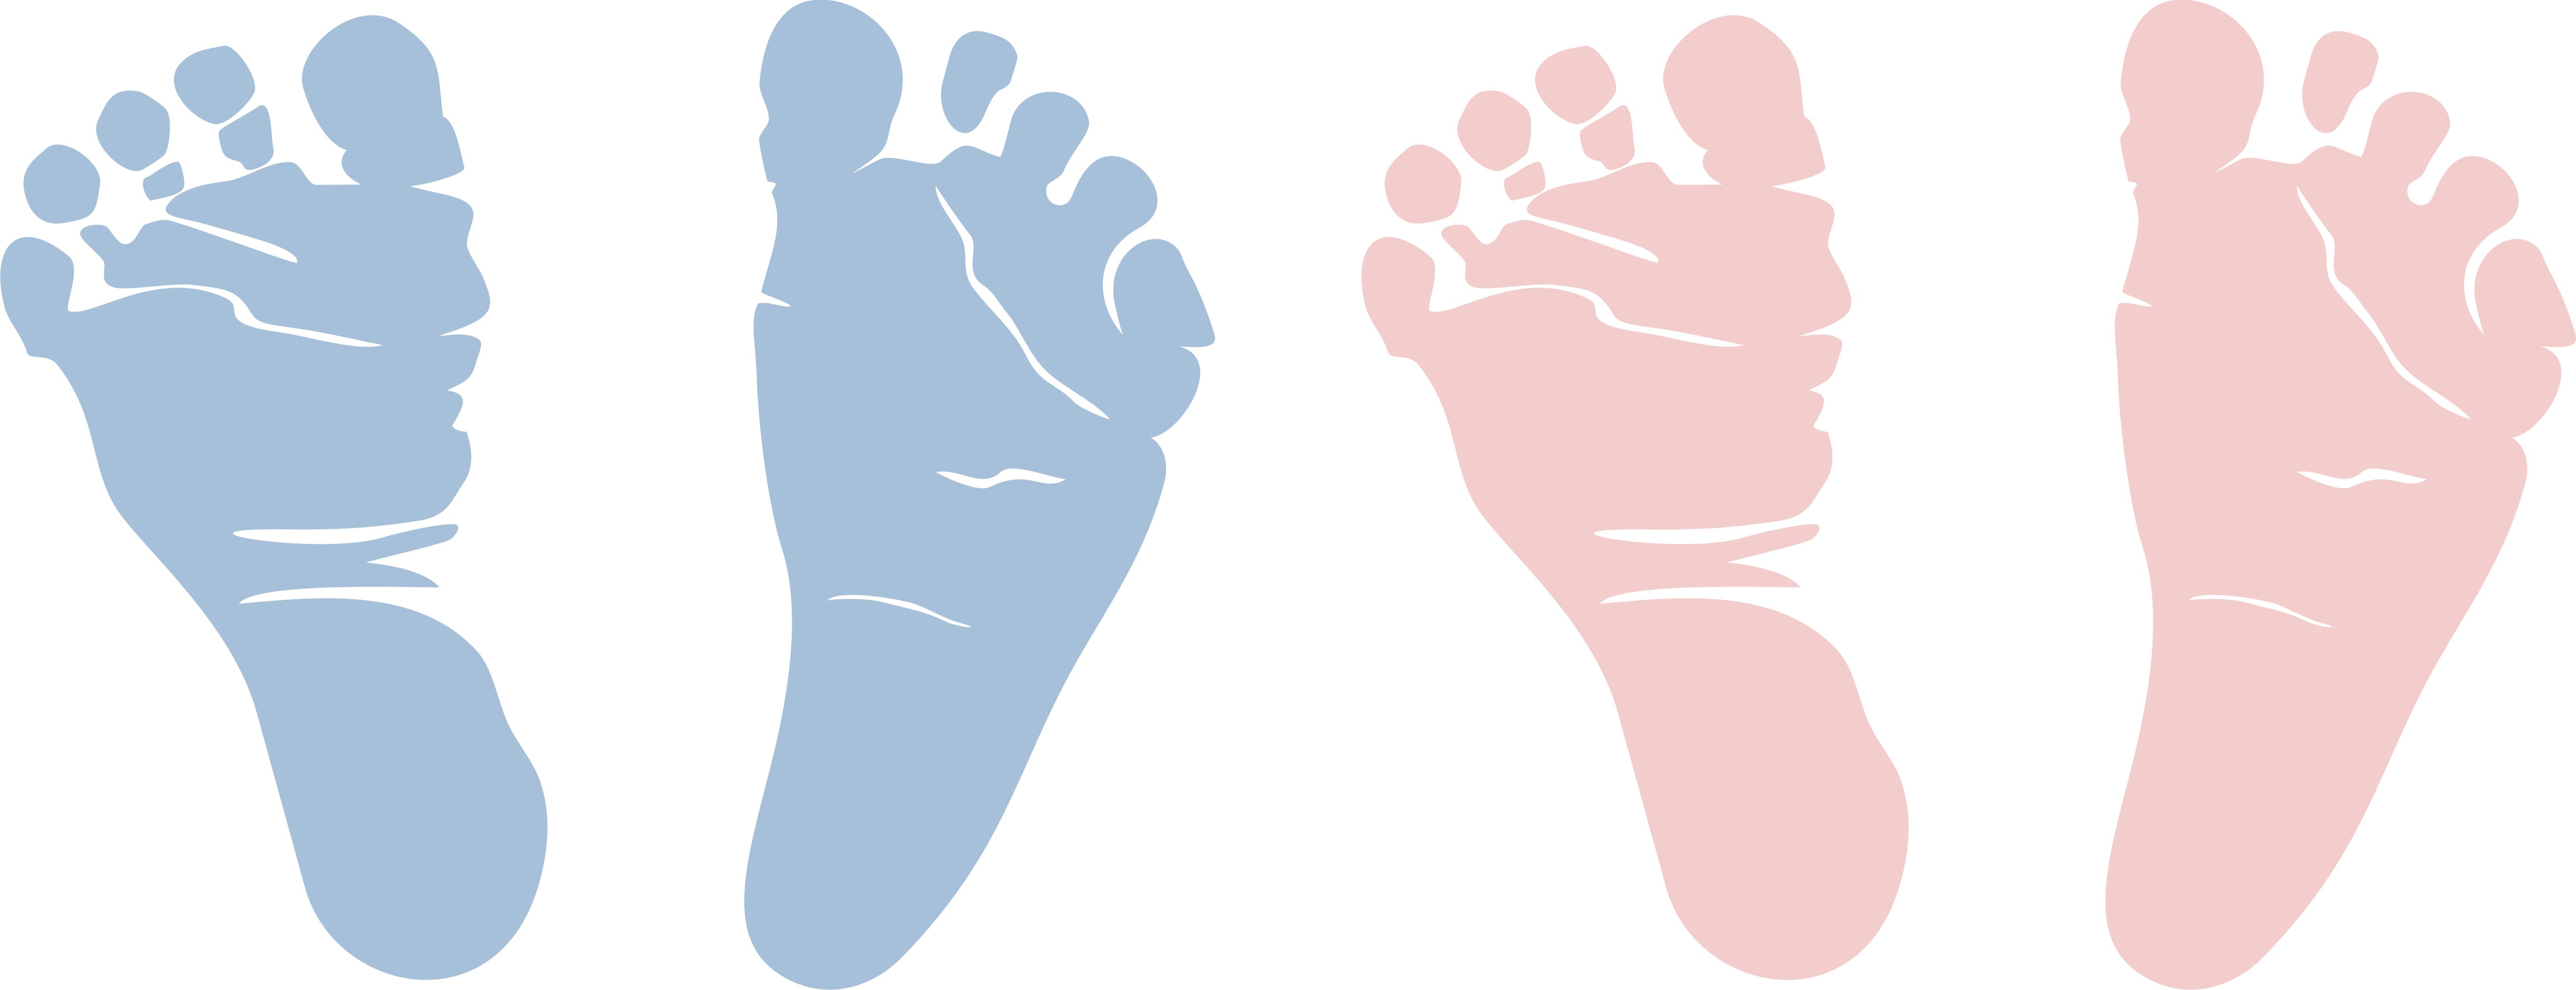 Baby Feet Silhouette Baby Footprints Baby Feet Clipart Baby Feet Baby ...